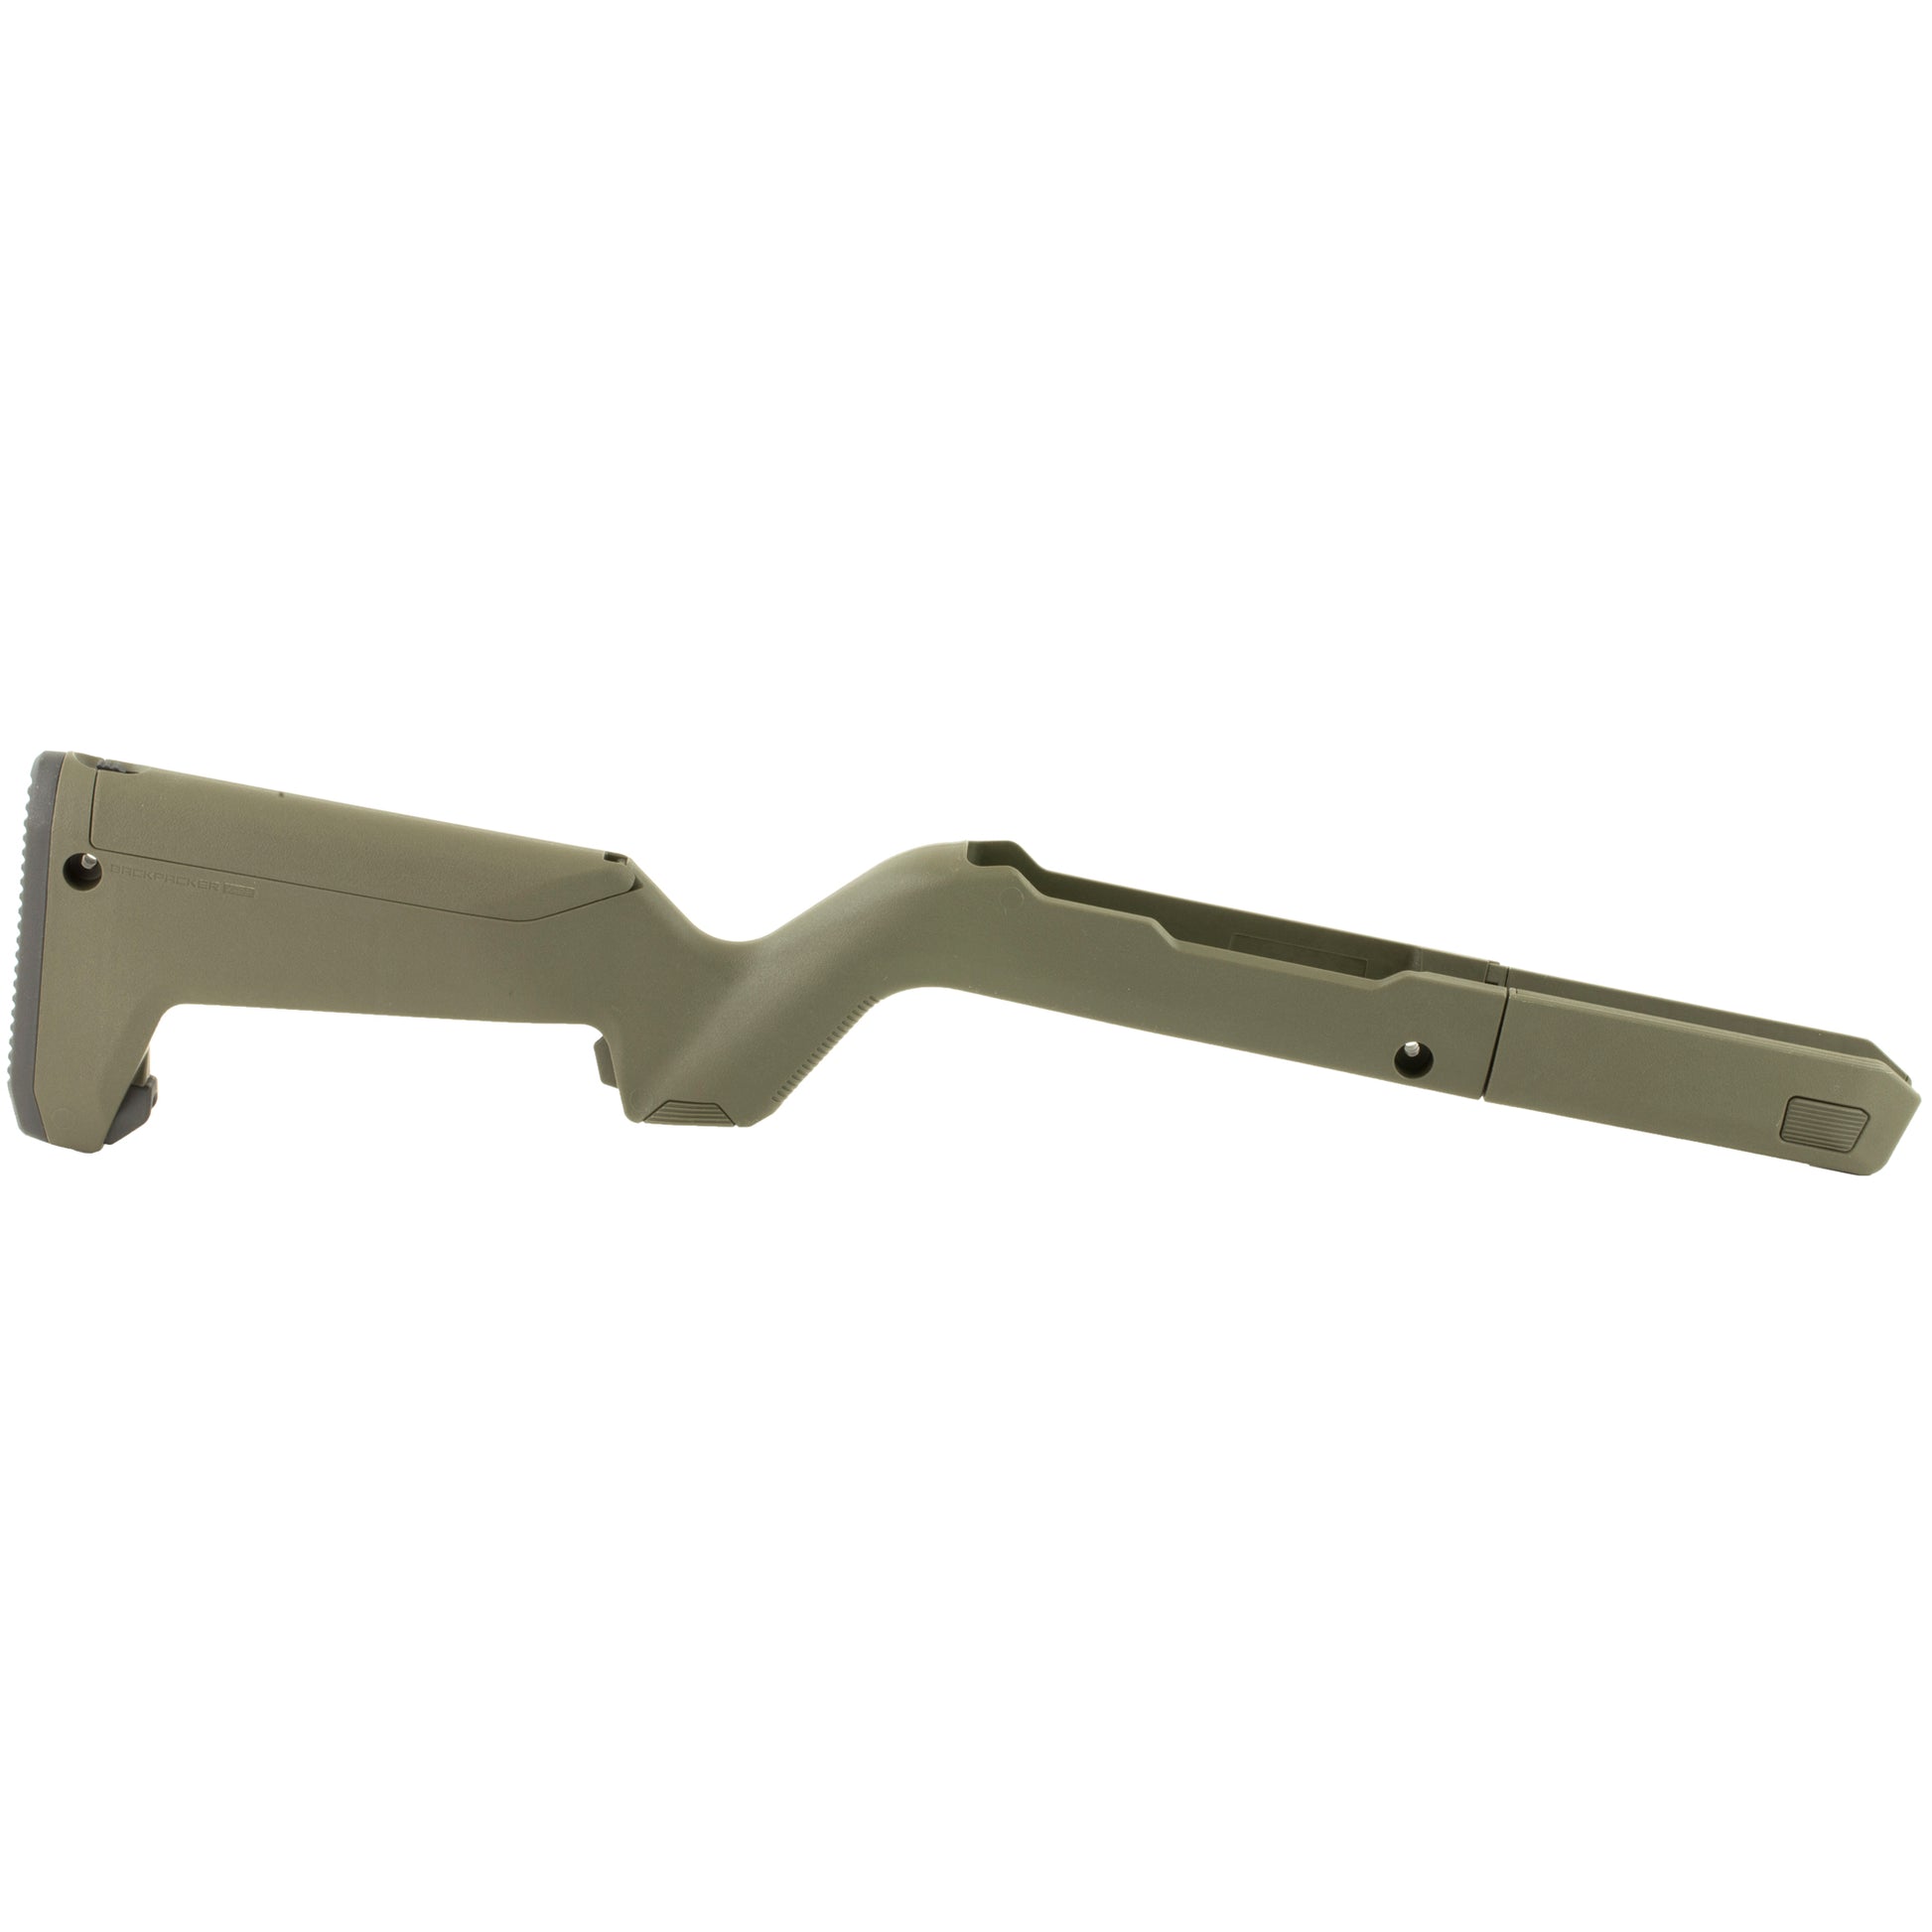 Magpul Industries X22 Backpacker Stock Fits Ruger 10/22 Takedowns ODG MAG808-ODG - California Shooting Supplies